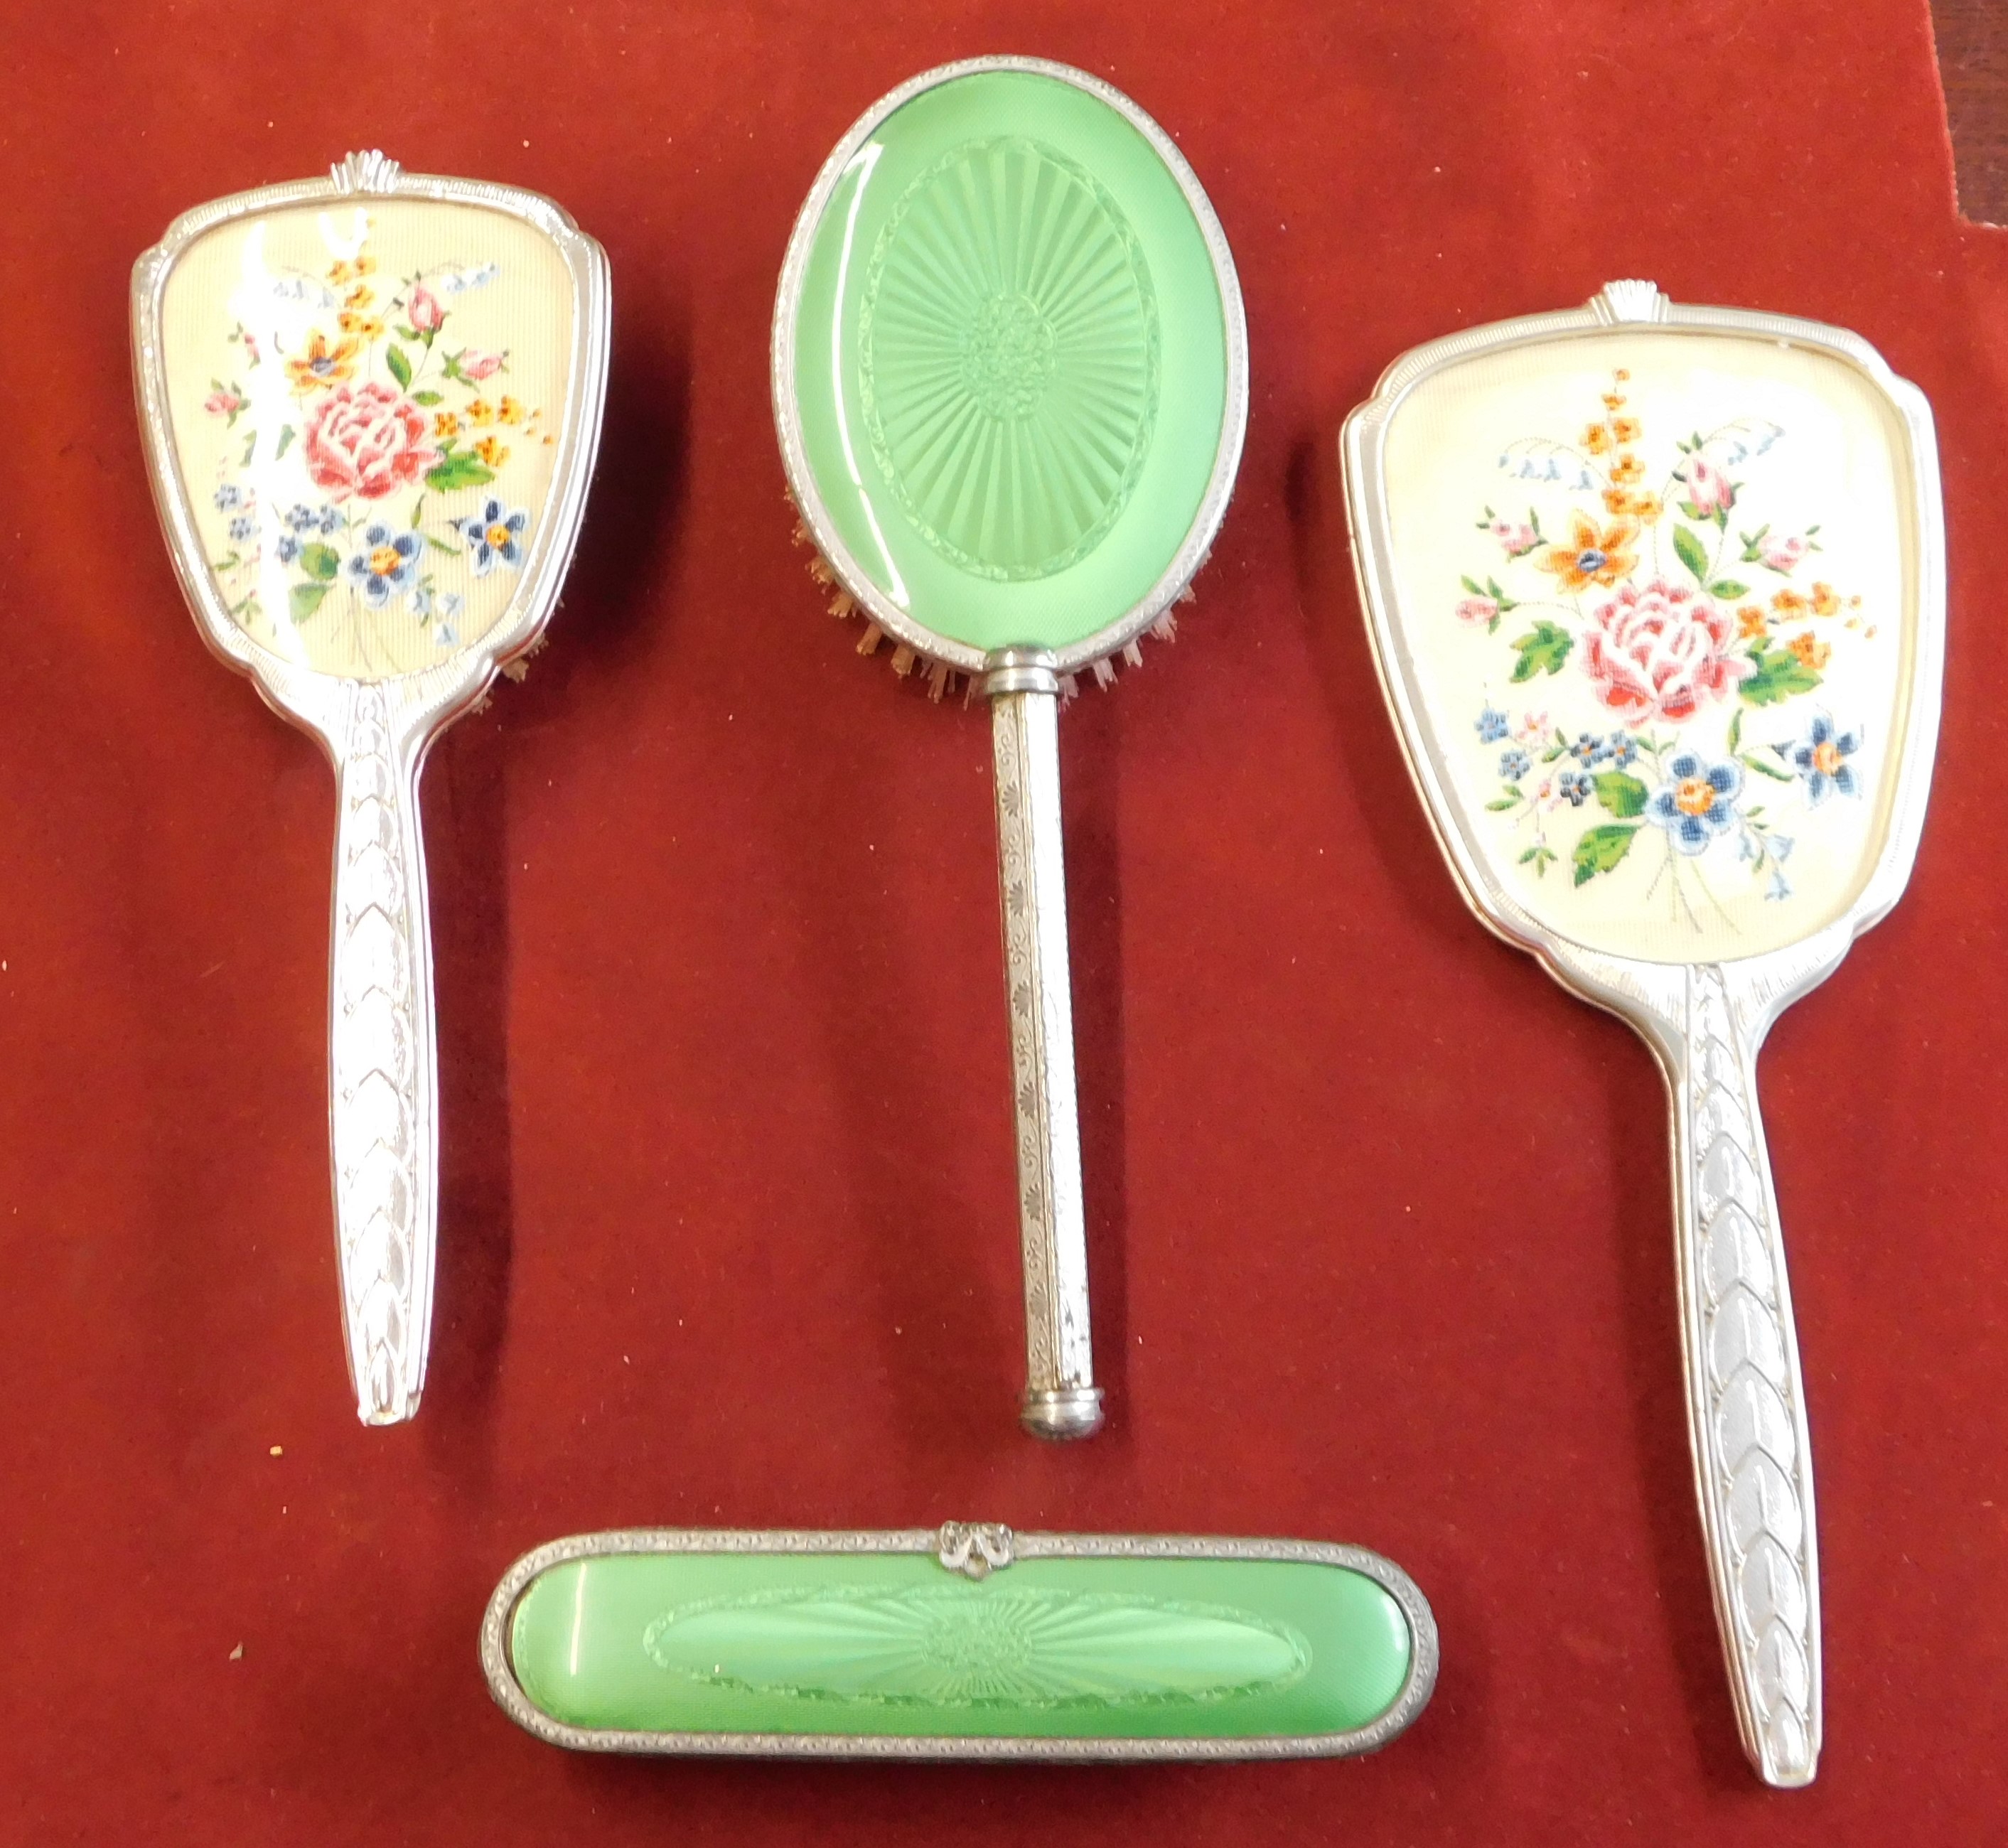 Brush/Mirror Dressing Table Set - comprising green back hair brush, clothes brush, hand mirror, - Image 5 of 5